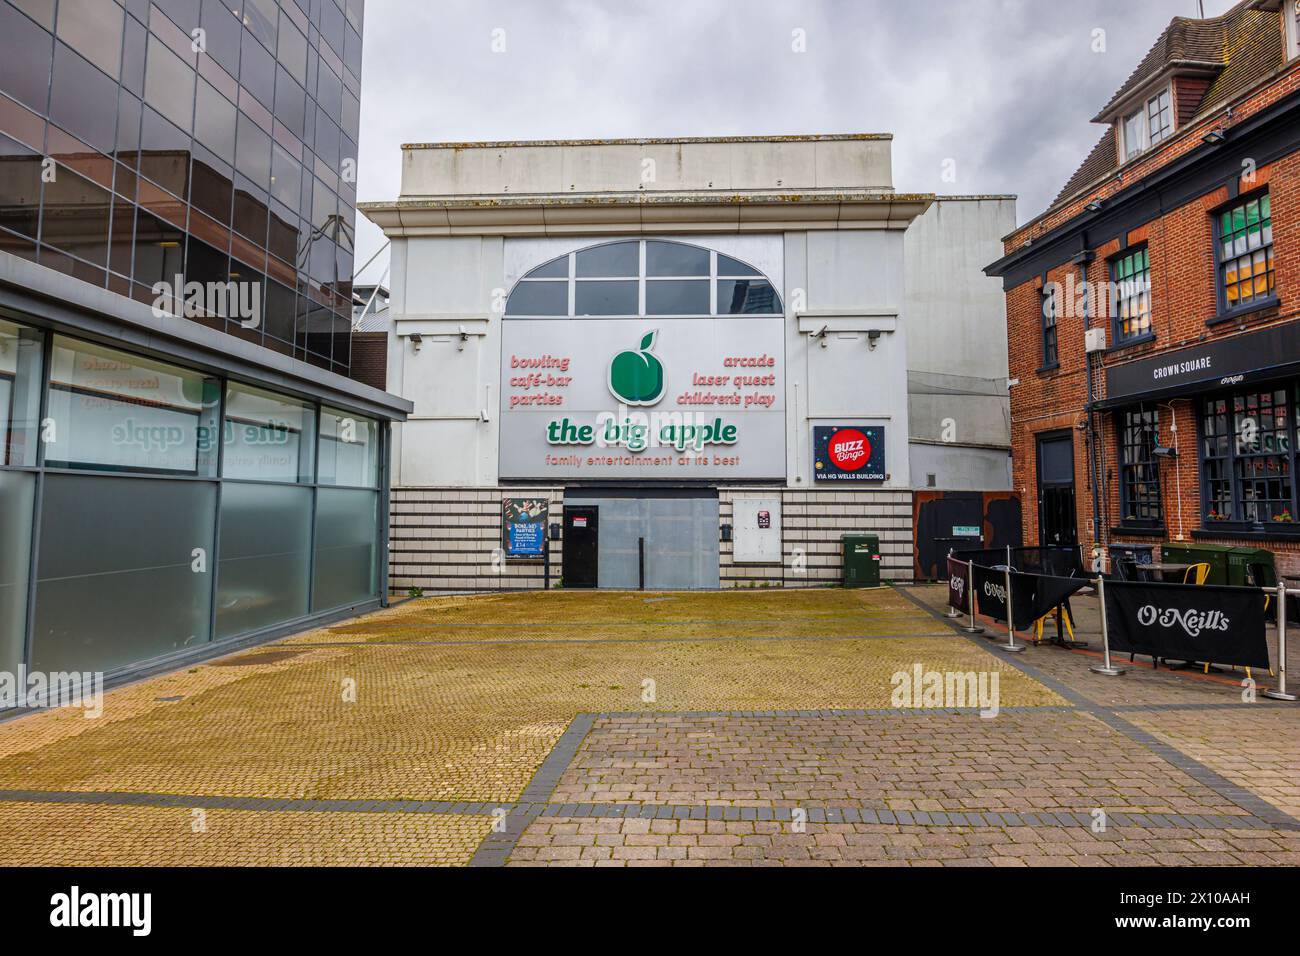 The Big Apple, a closed, boarded up and disused family entertainment centre in central Woking, a town in Surrey, England Stock Photo